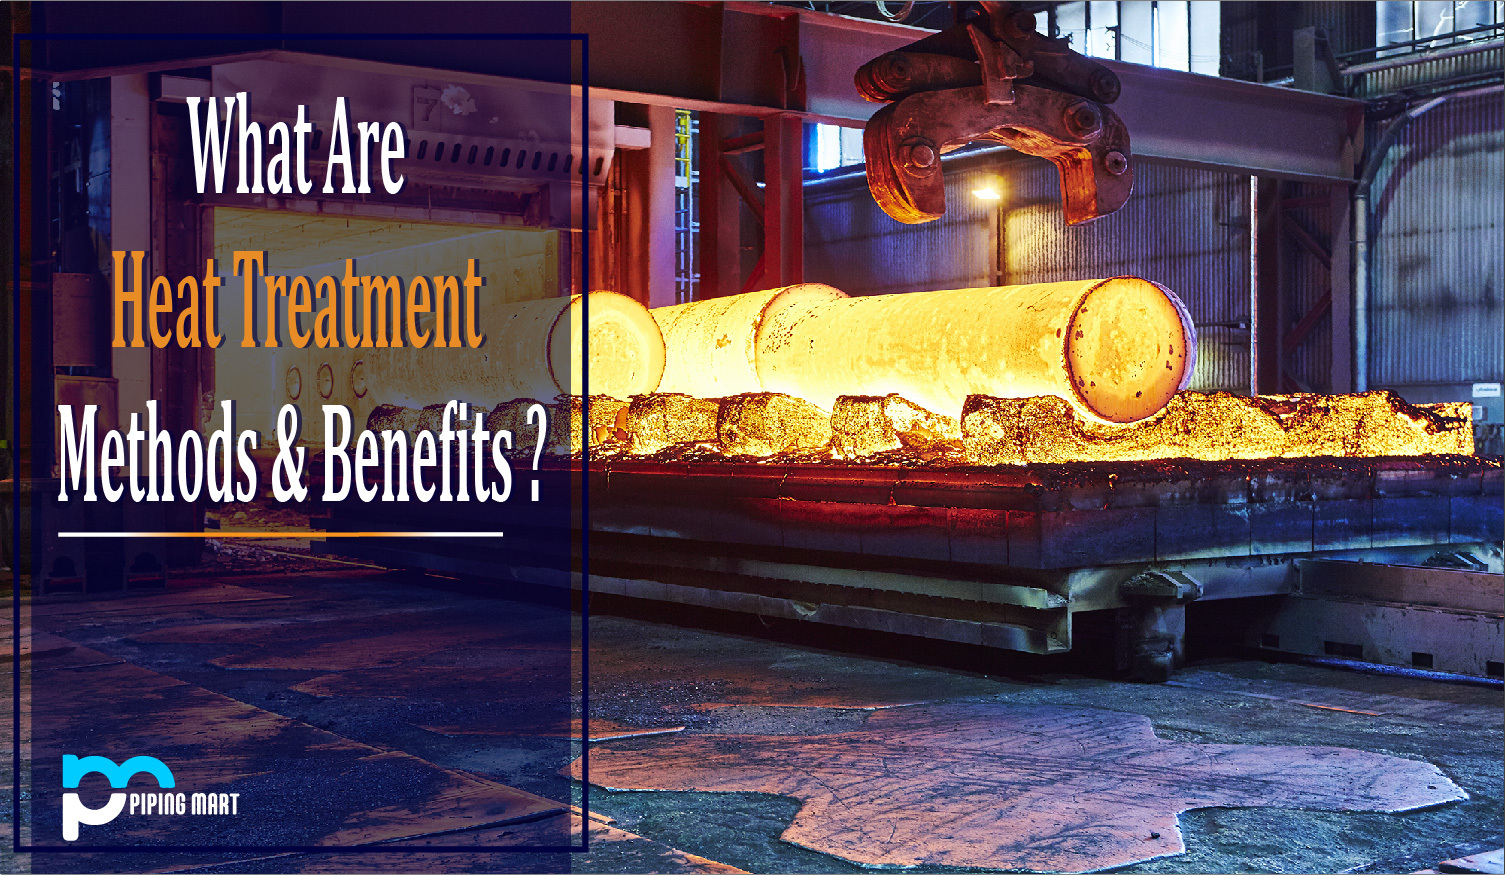 What Are Heat Treatment Methods & Benefits?